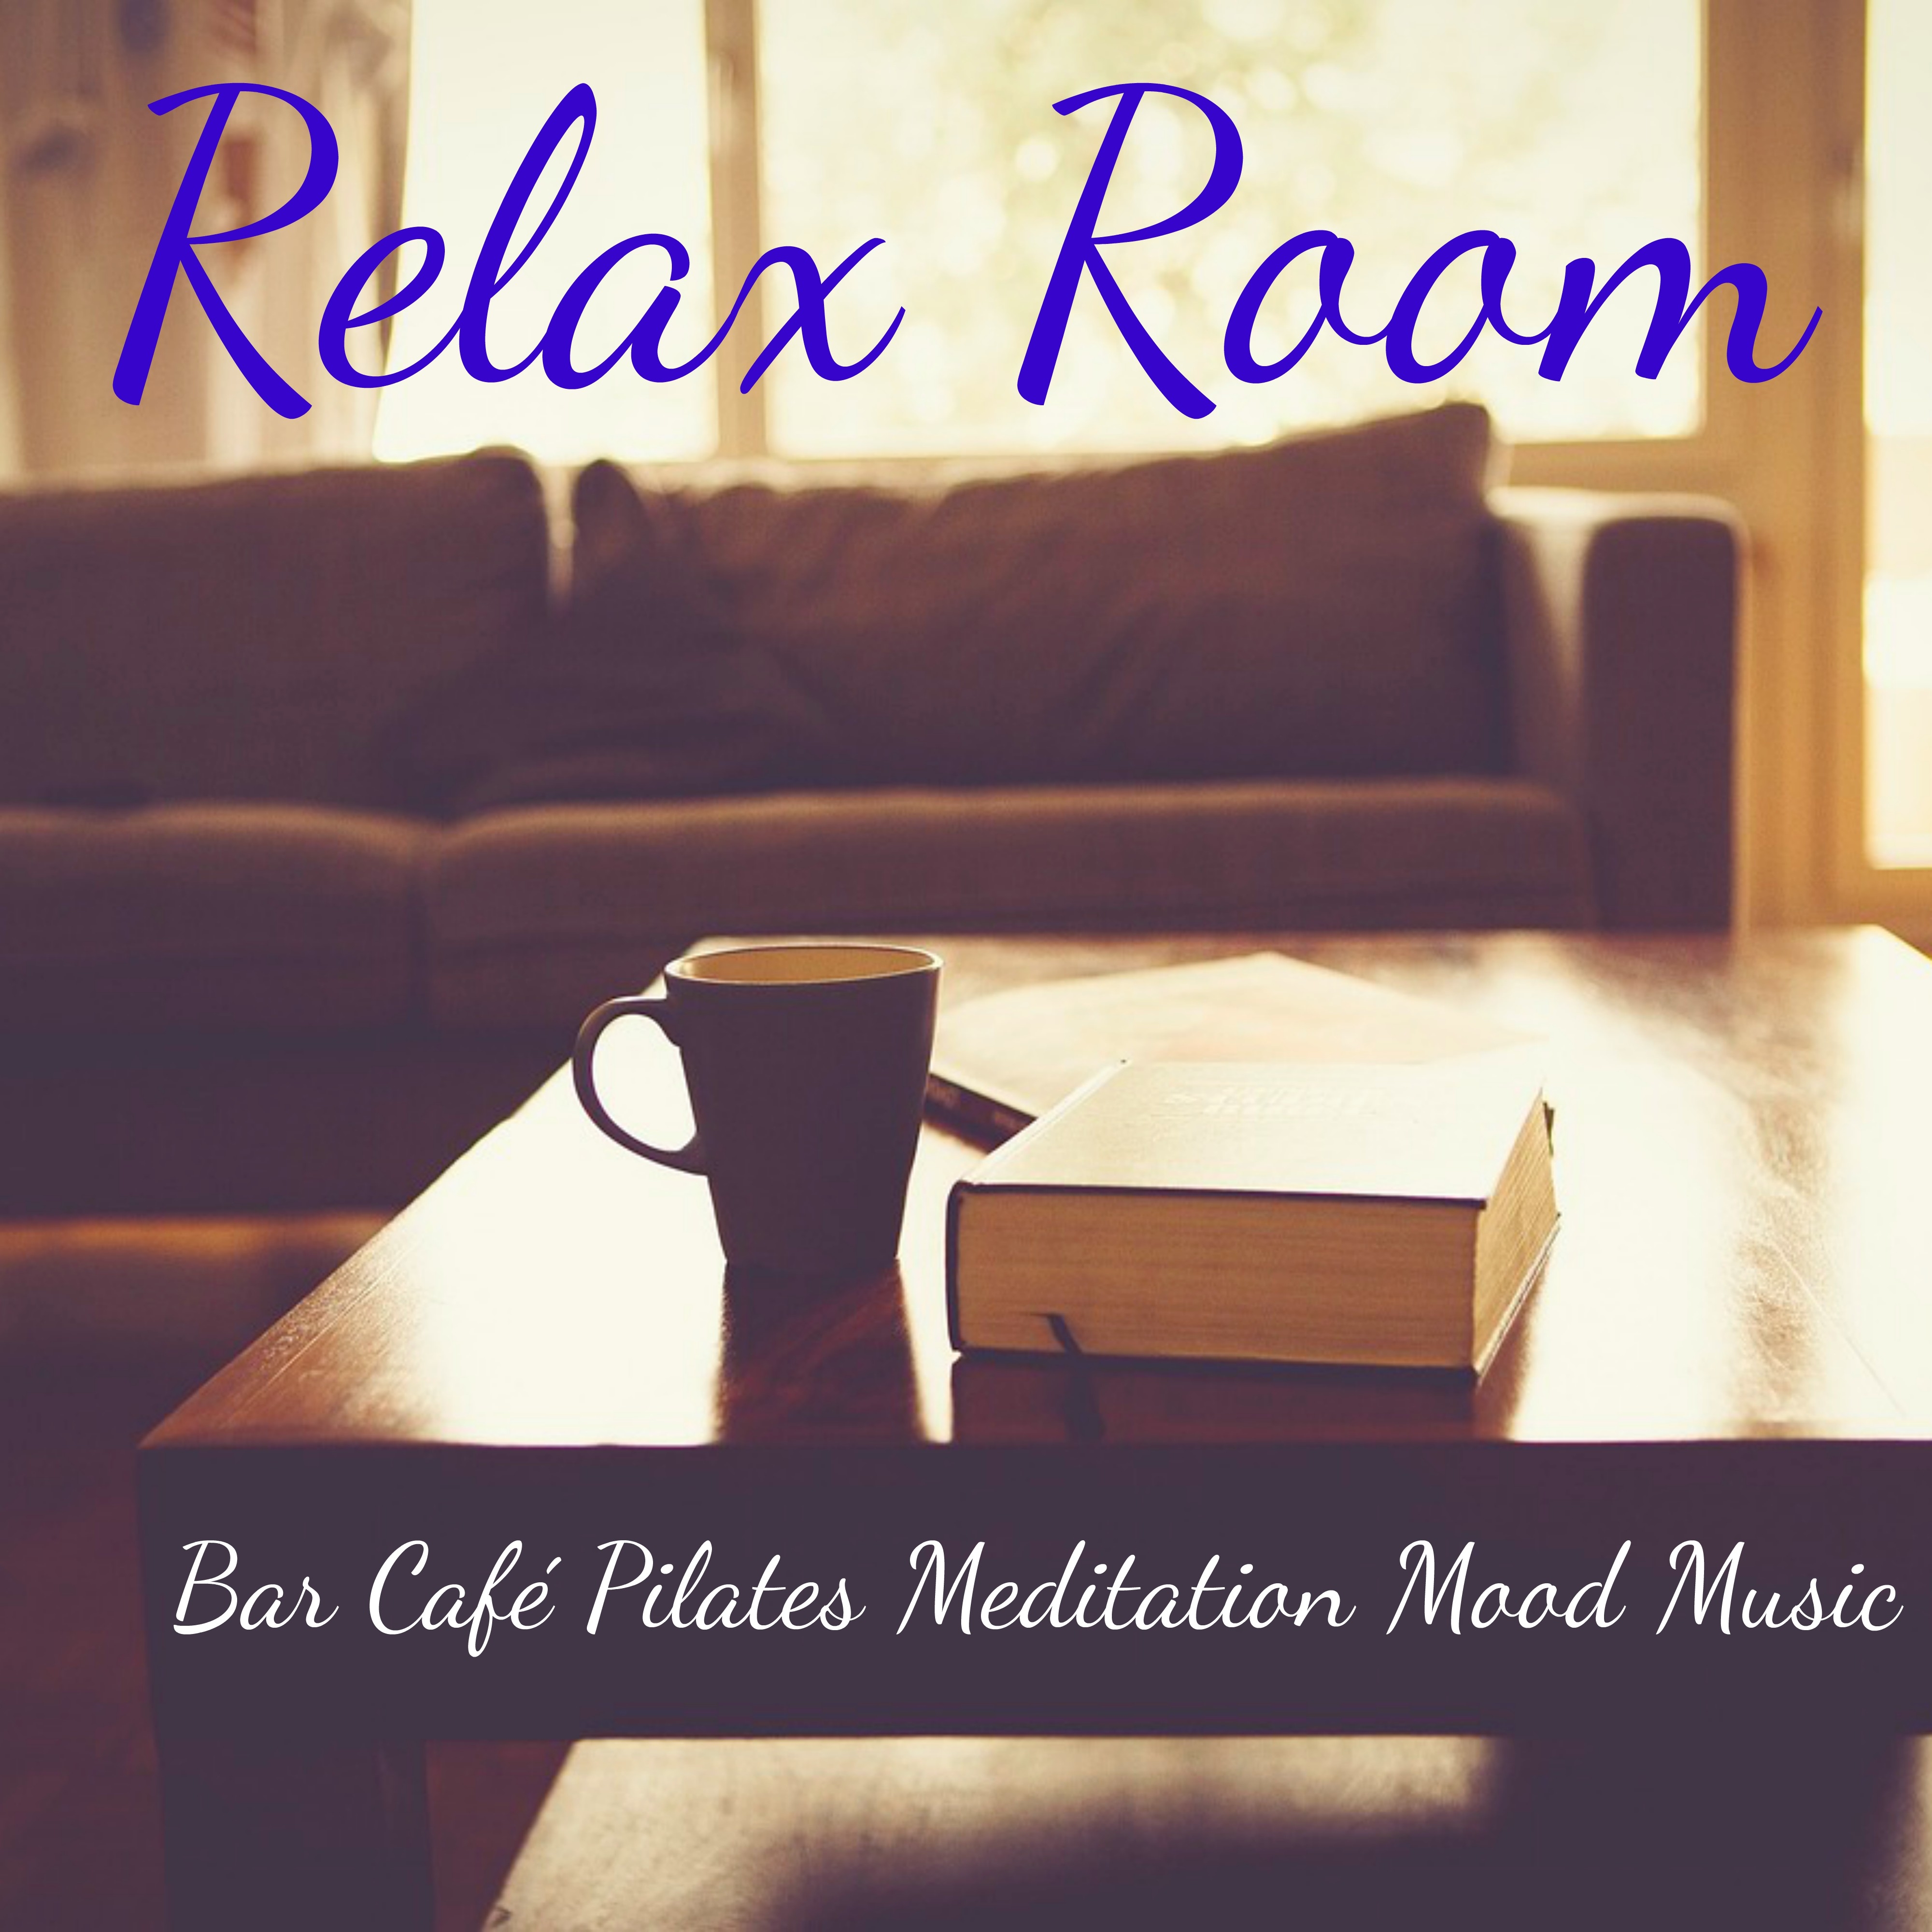 Relax Room  Bar Cafe Pilates Meditation Mood Music with Chillout Lounge Instrumental Sounds